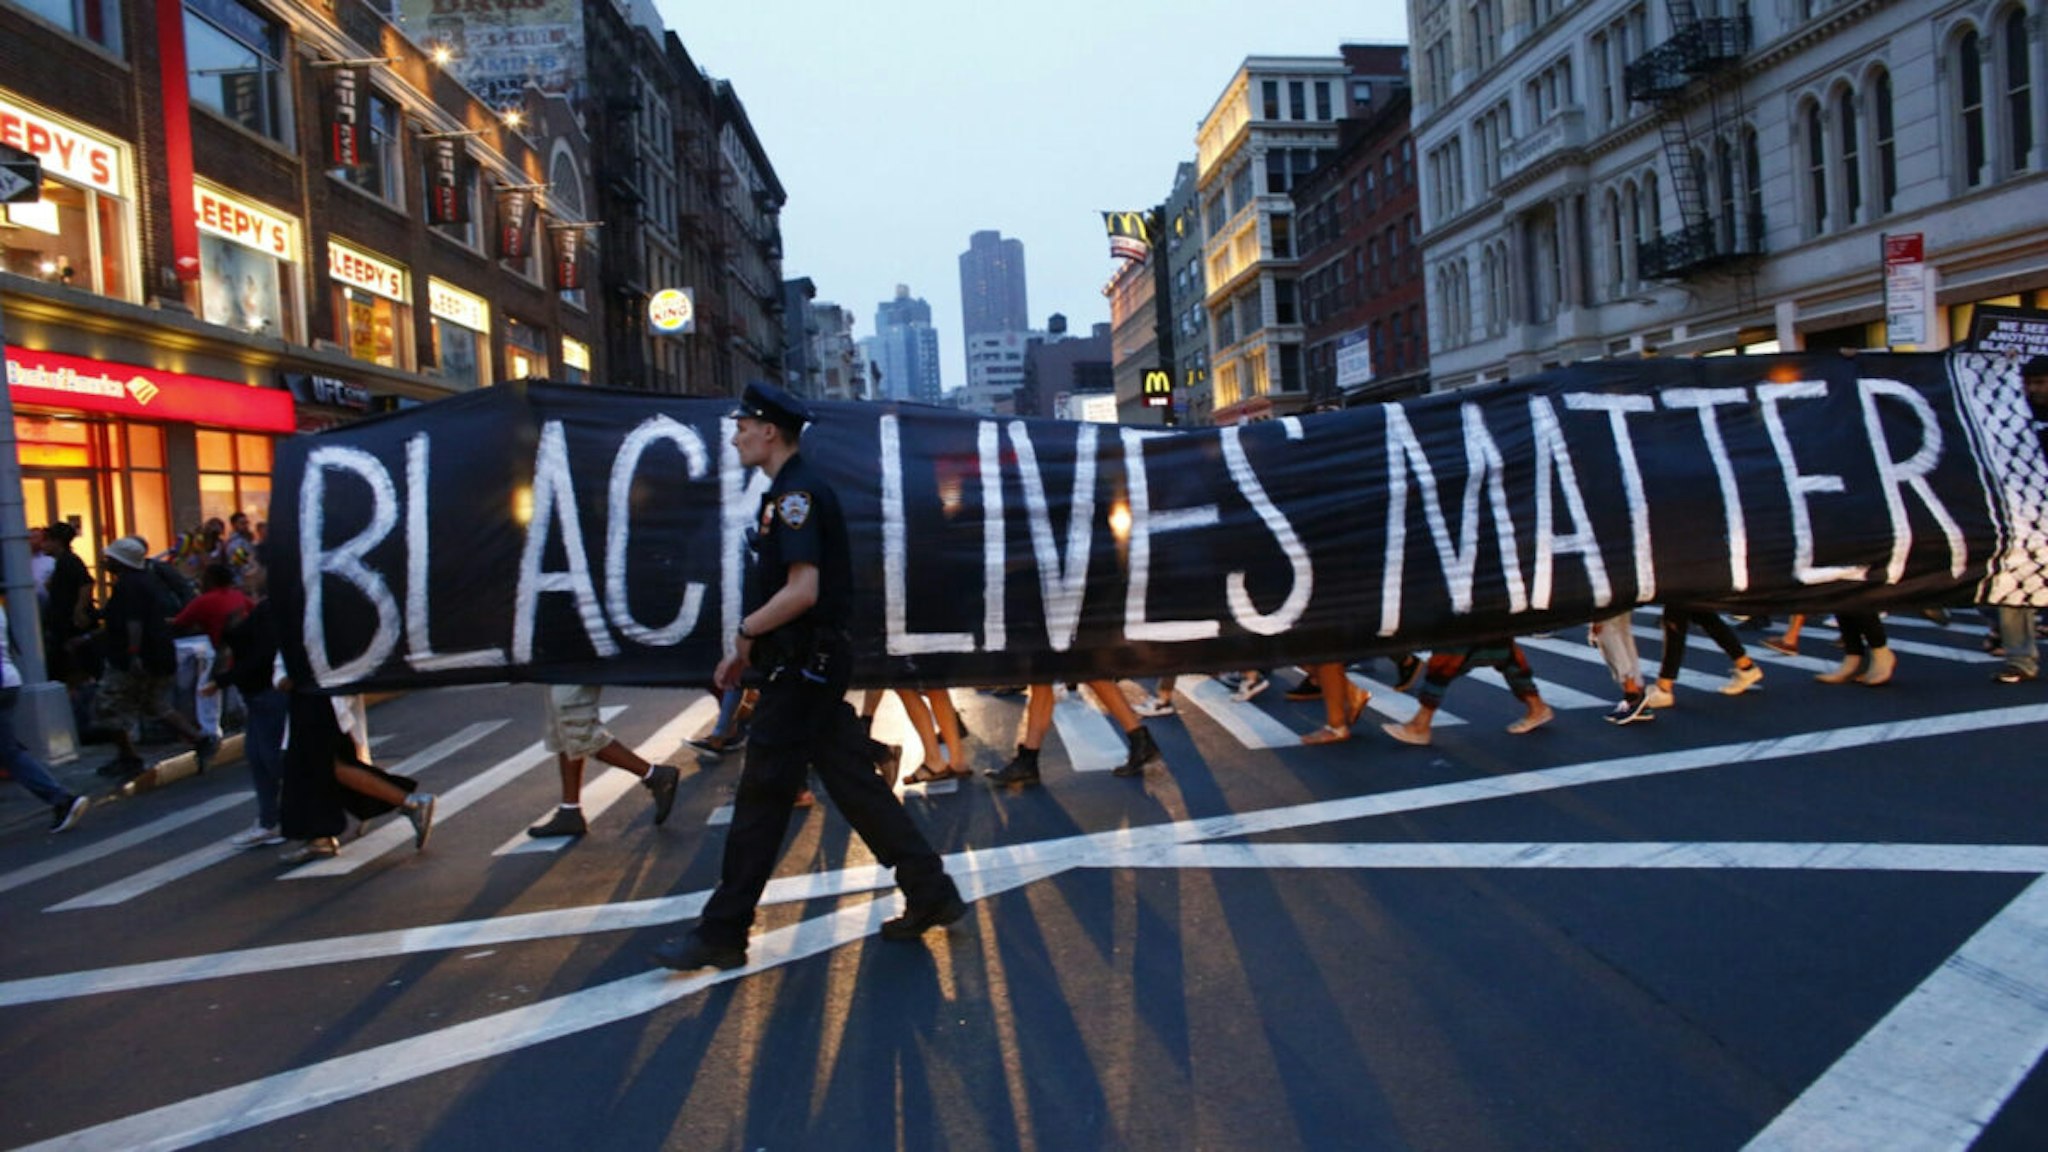 A police officer patrols during a protest in support of the Black lives matter movement in New York on July 09, 2016.